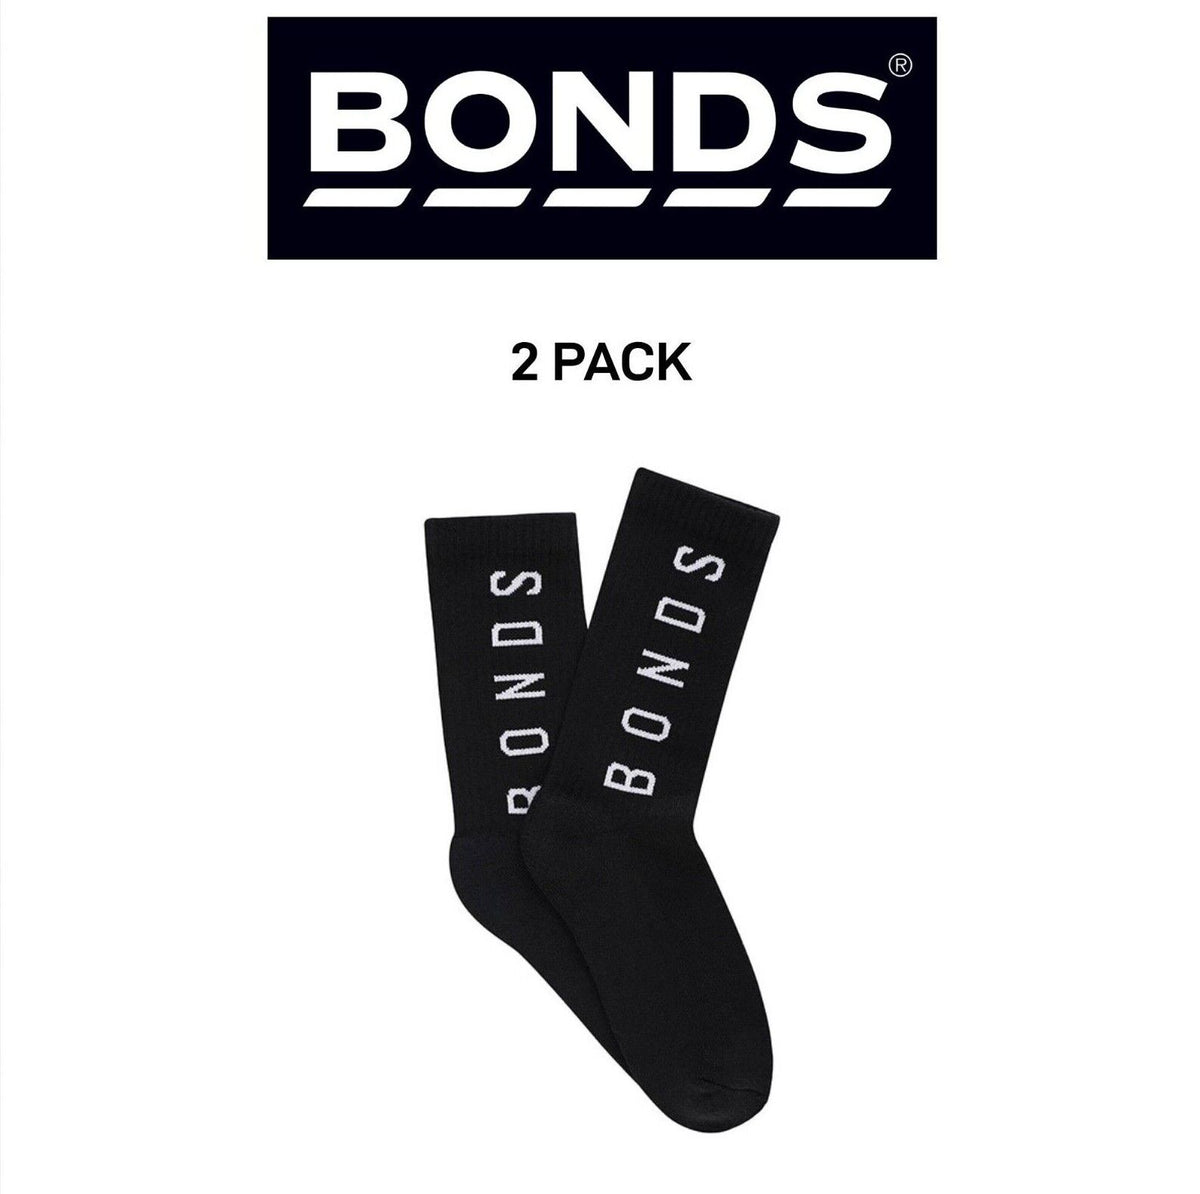 Bonds Mens Originals Crew Socks Stretchy Rib Ankle & Arch Support 2 Pack SYEX2N